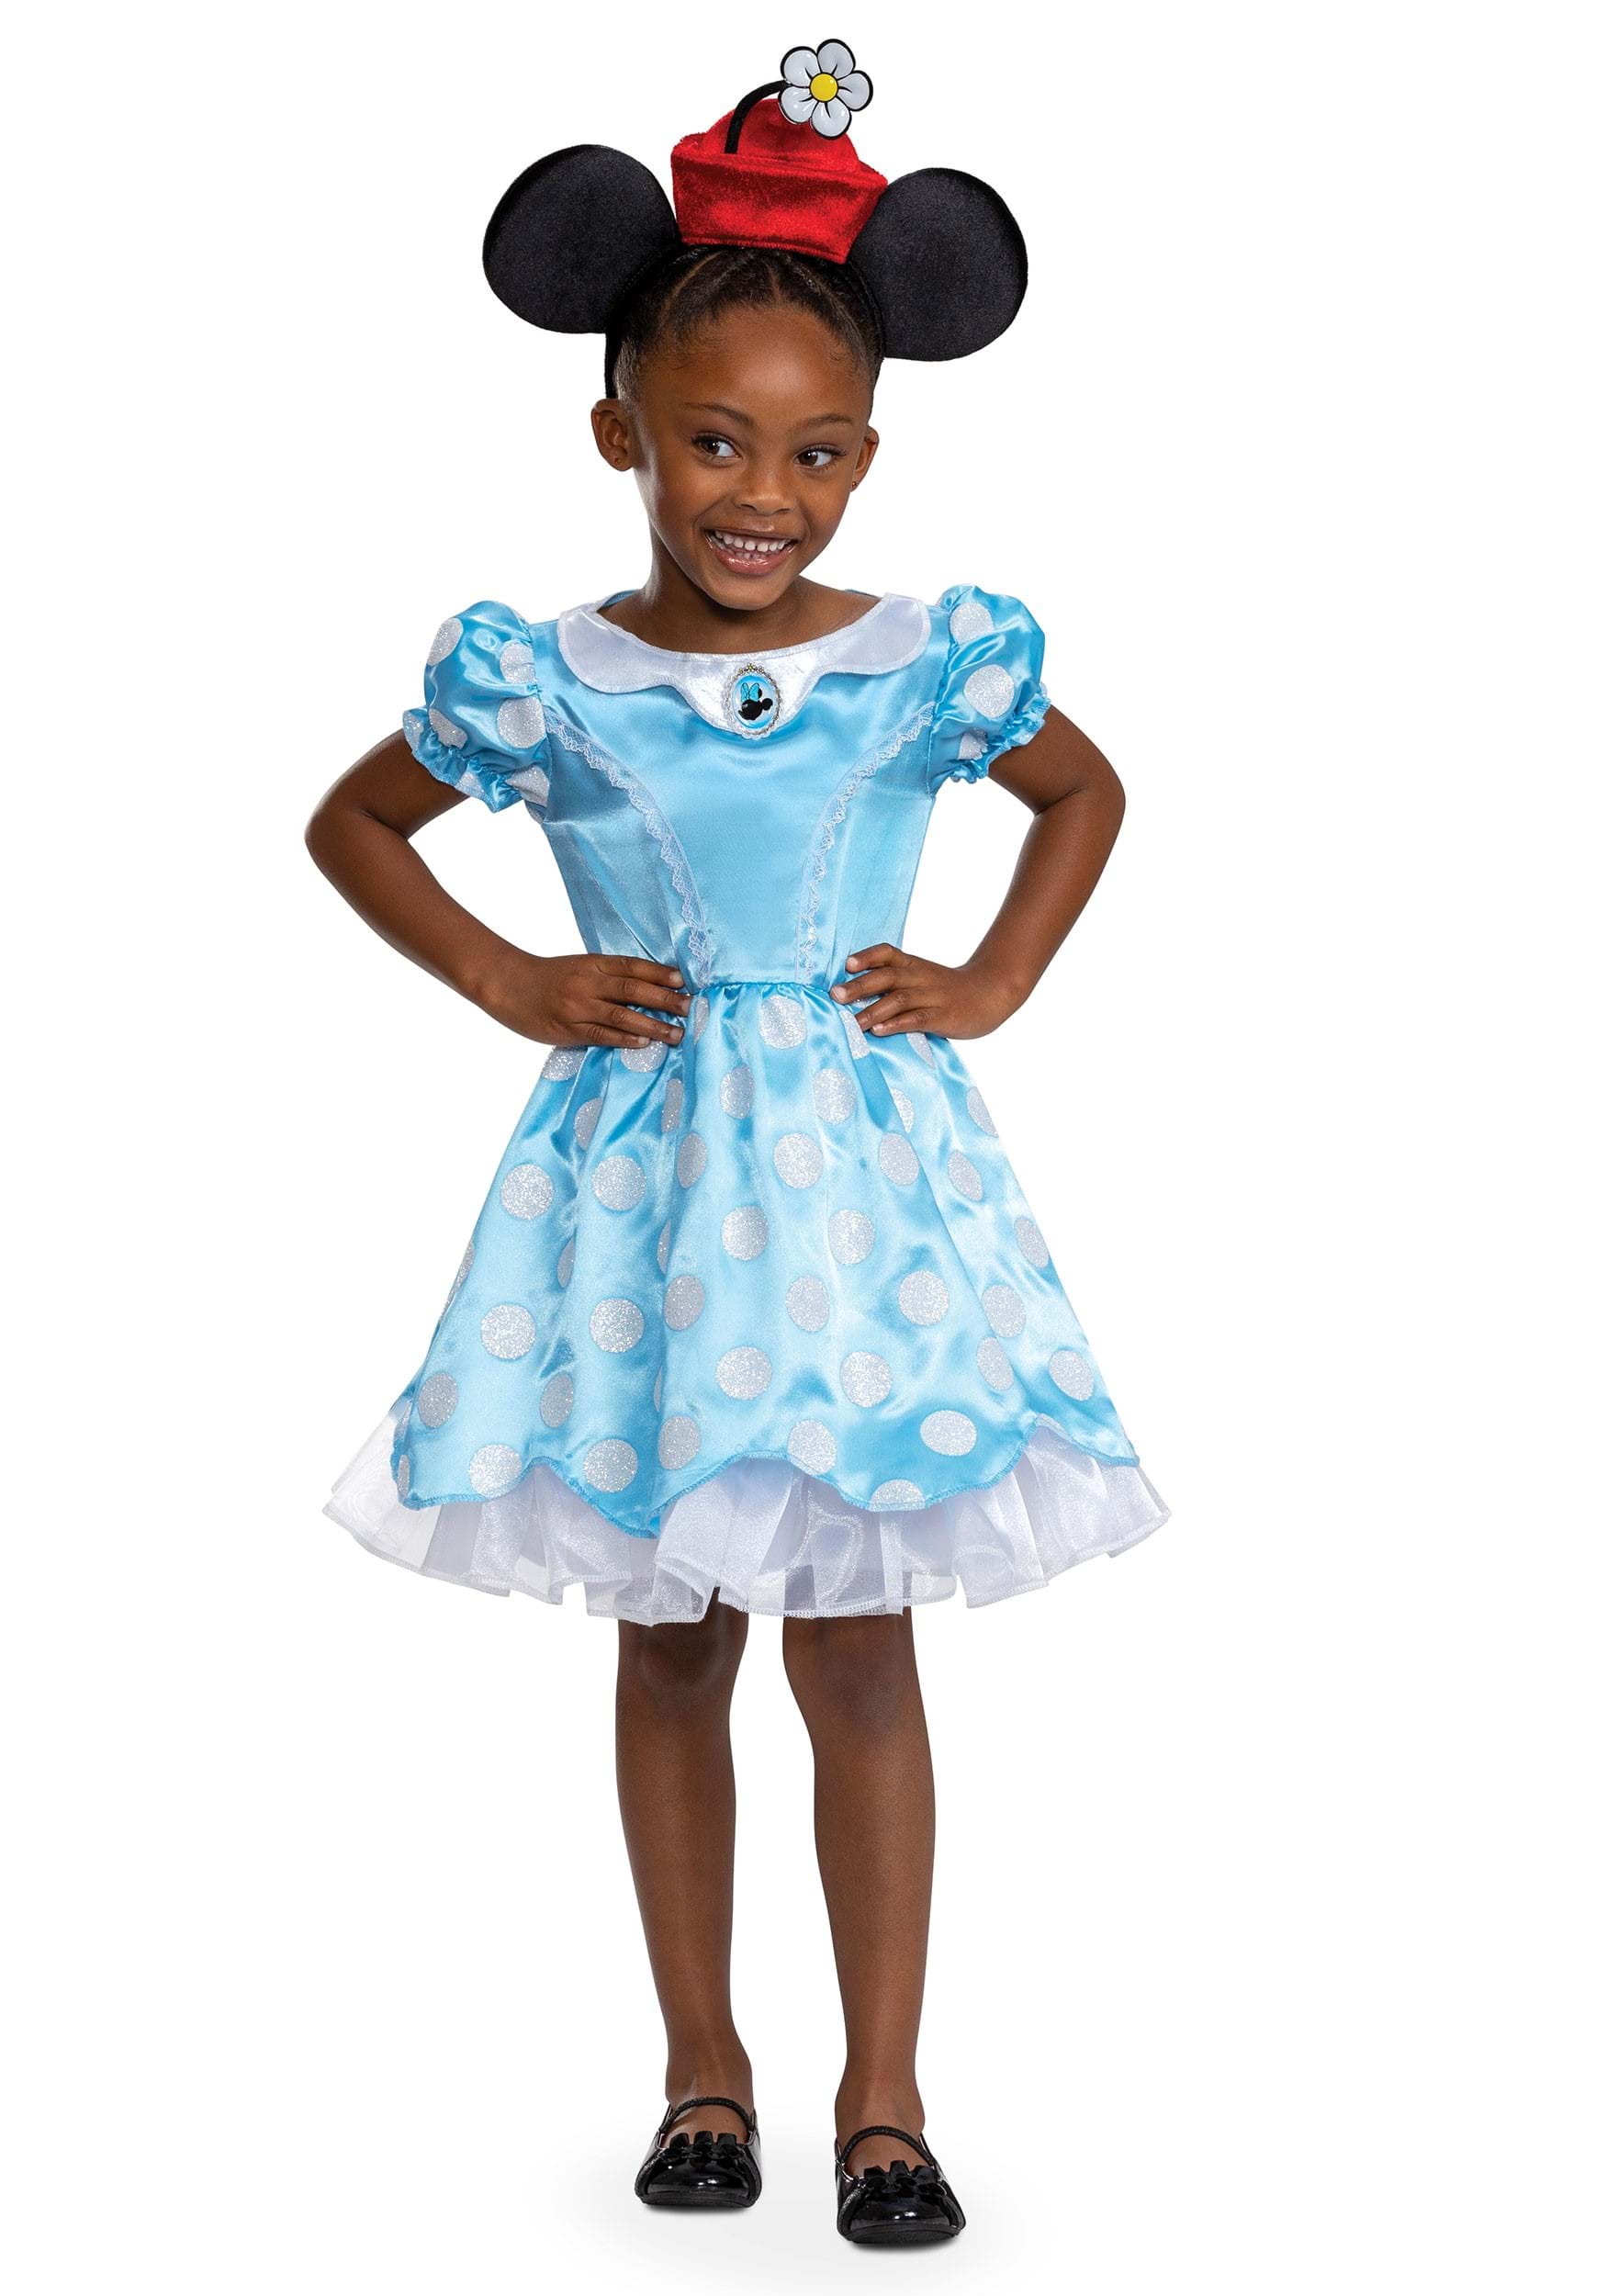 https://images.halloween.com/products/91750/1-1/disney-child-vintage-minnie-mouse-costume.jpg